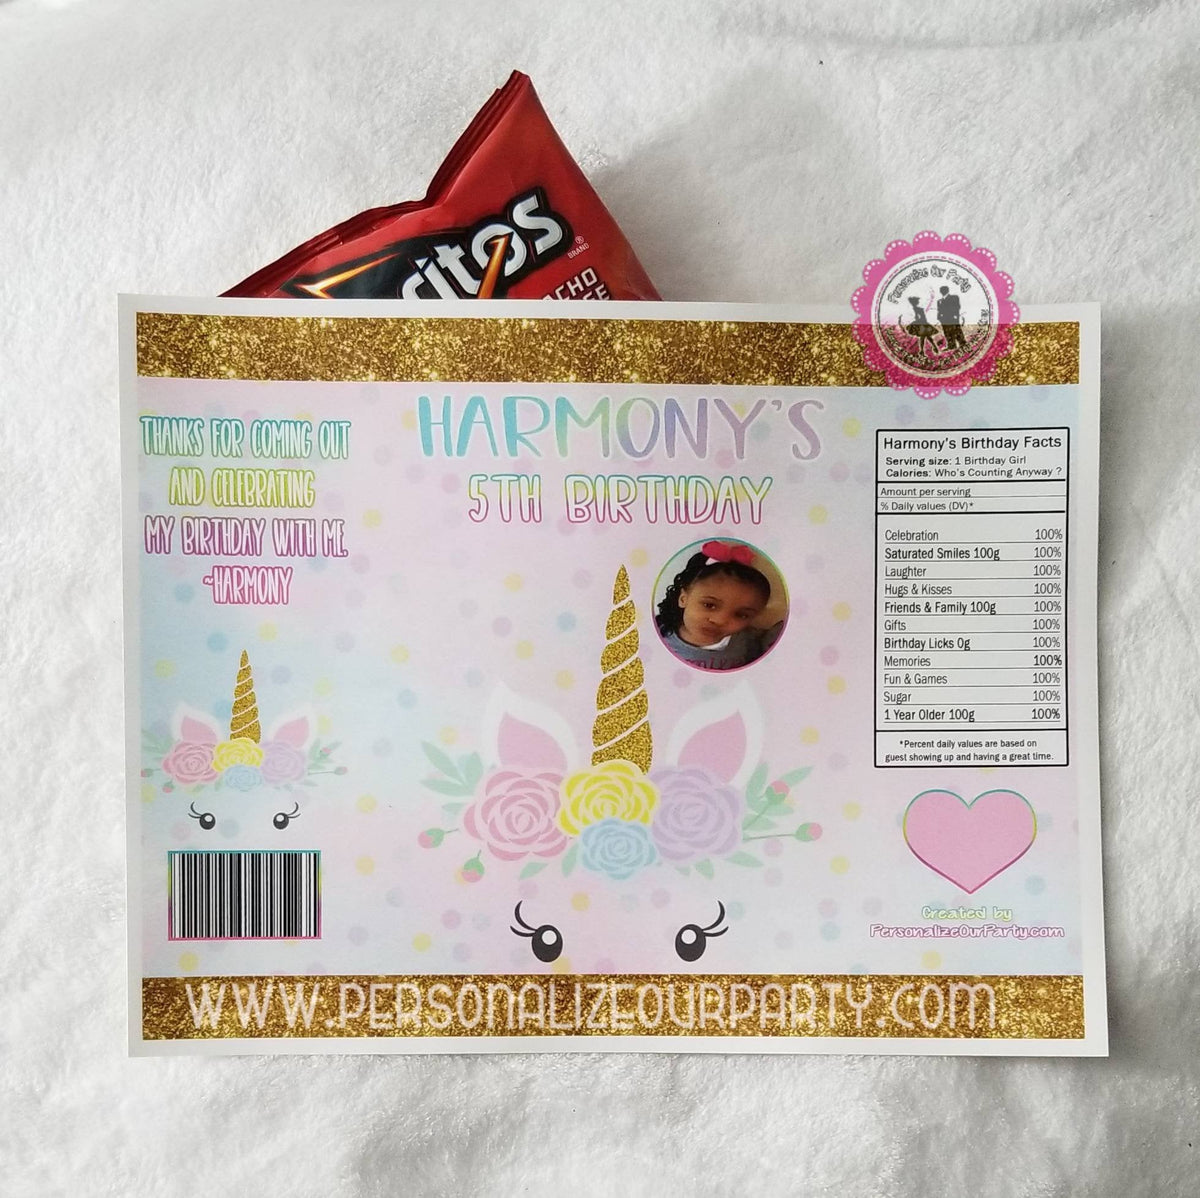 Rainbow Unicorn chip bag/wrappers-unicorn party favors-unicorn birthda –  Personalize Our Party